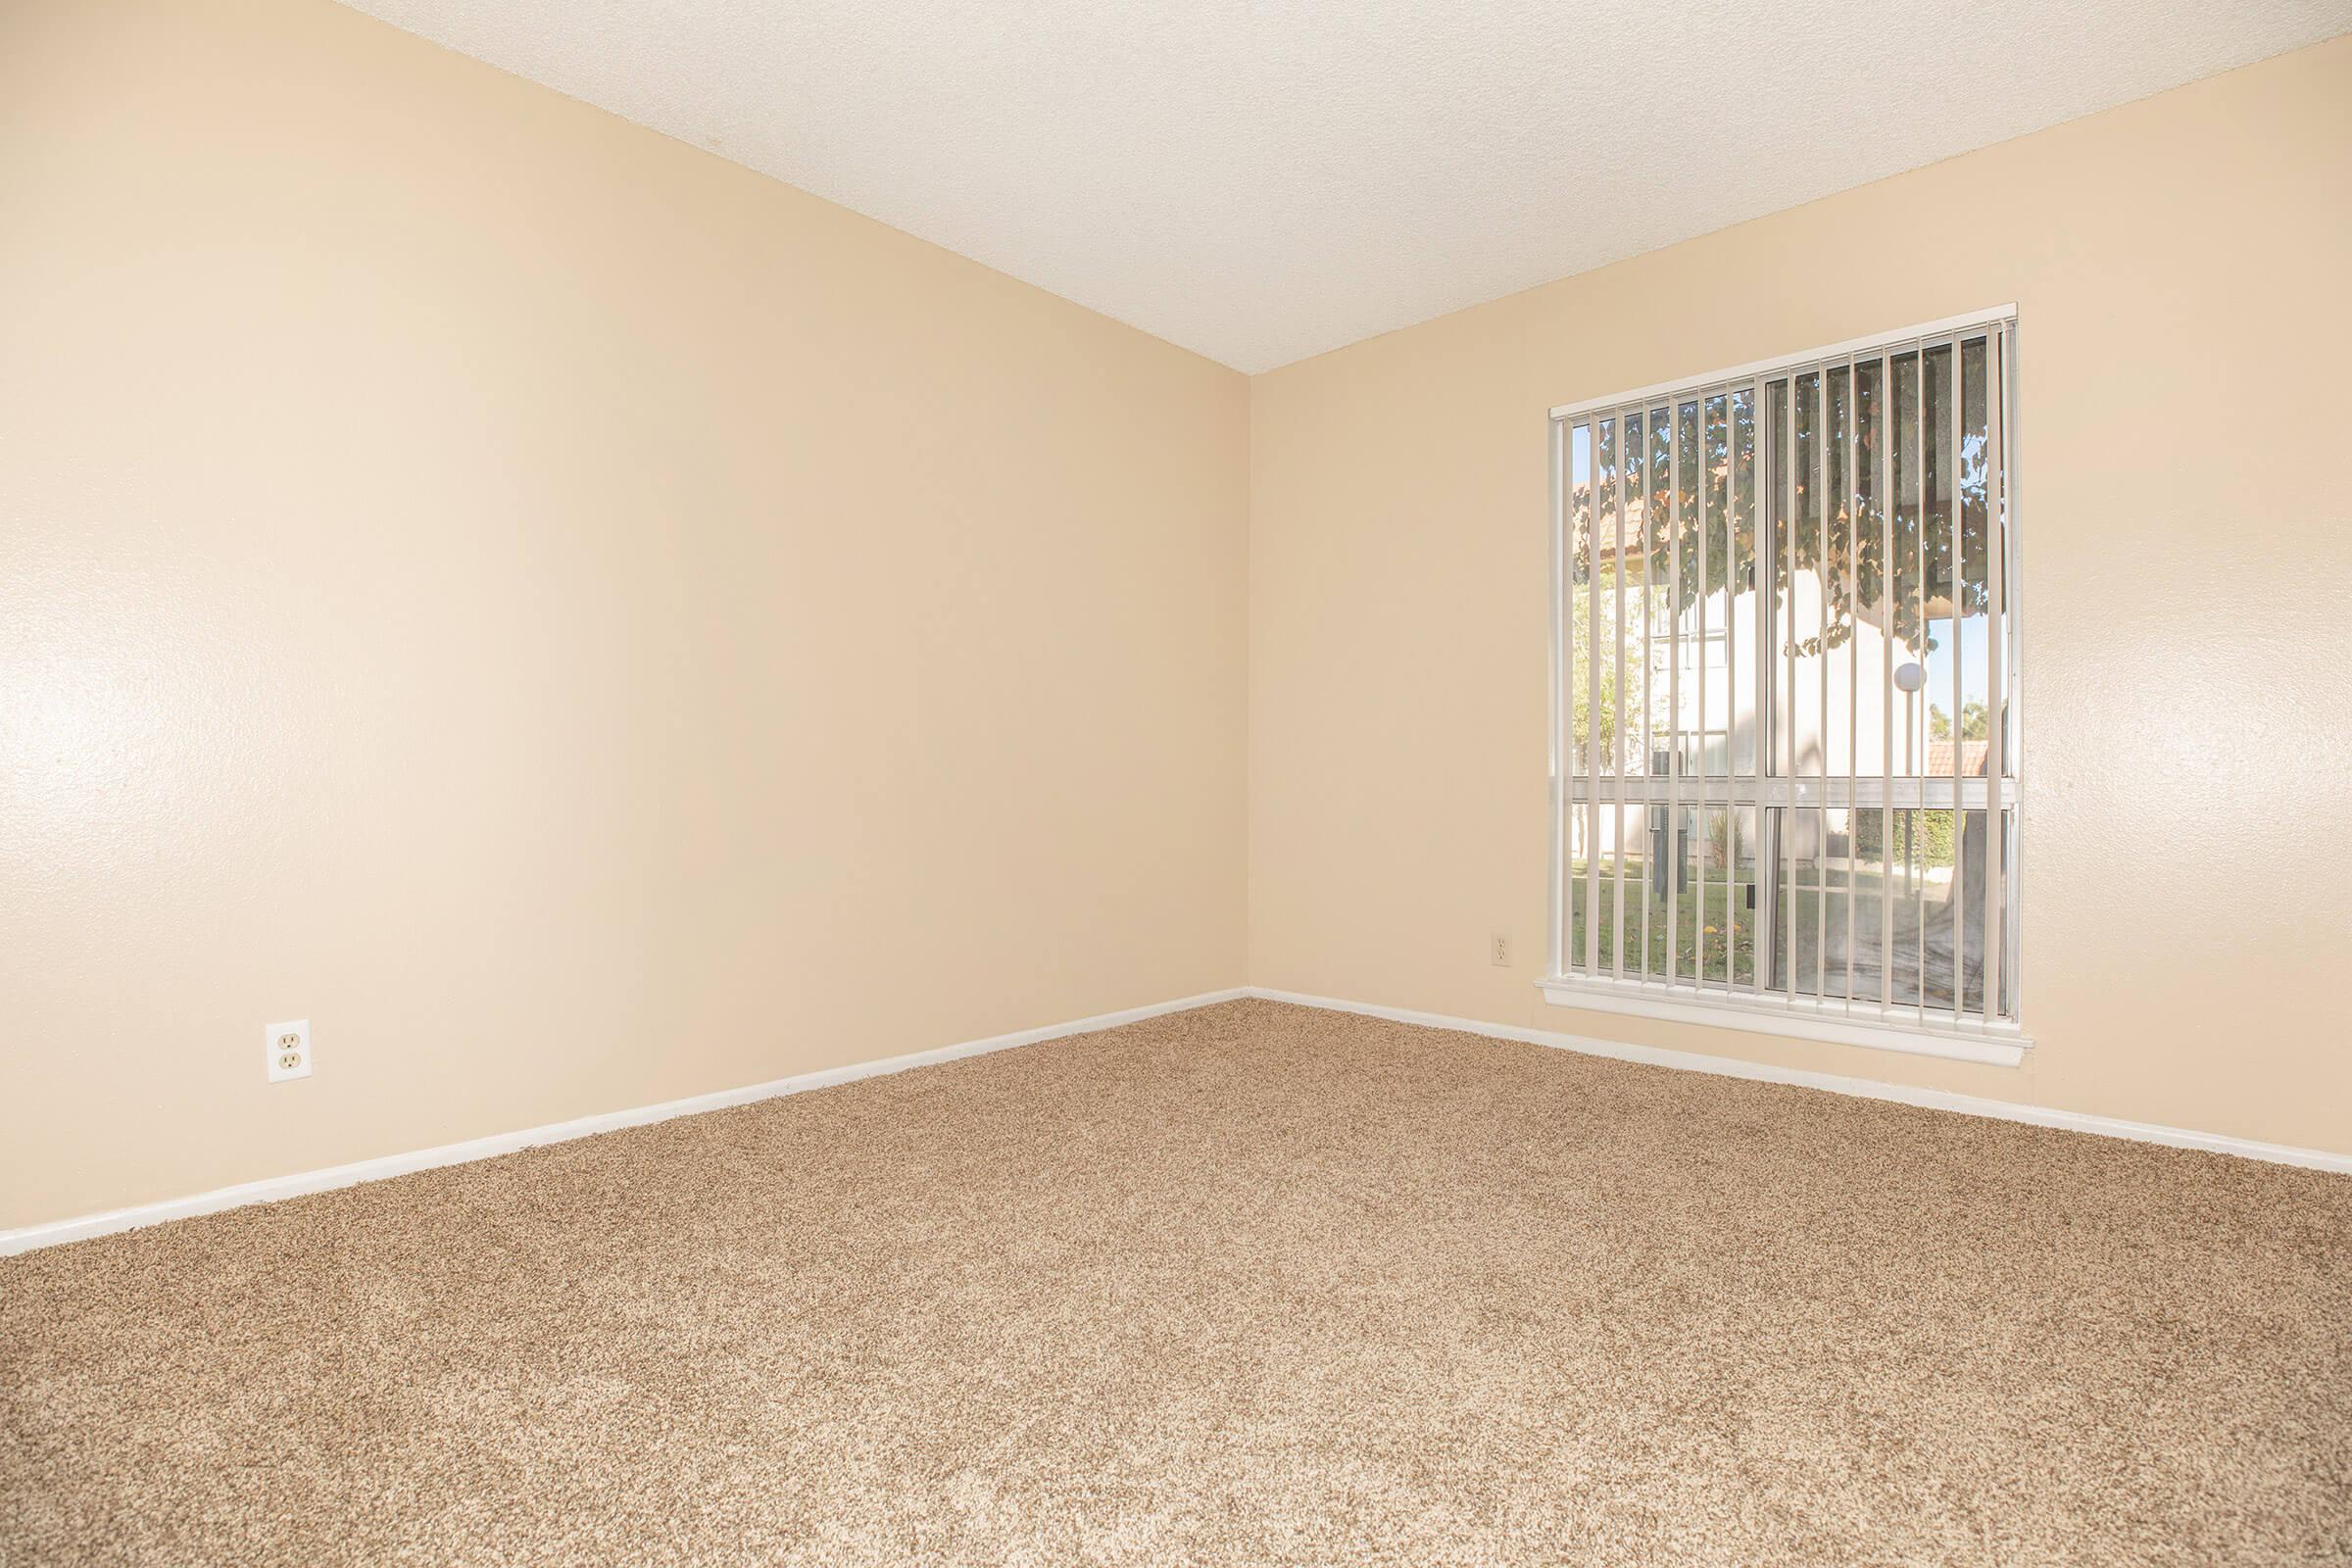 Vacant carpeted bedroom with open window blinds